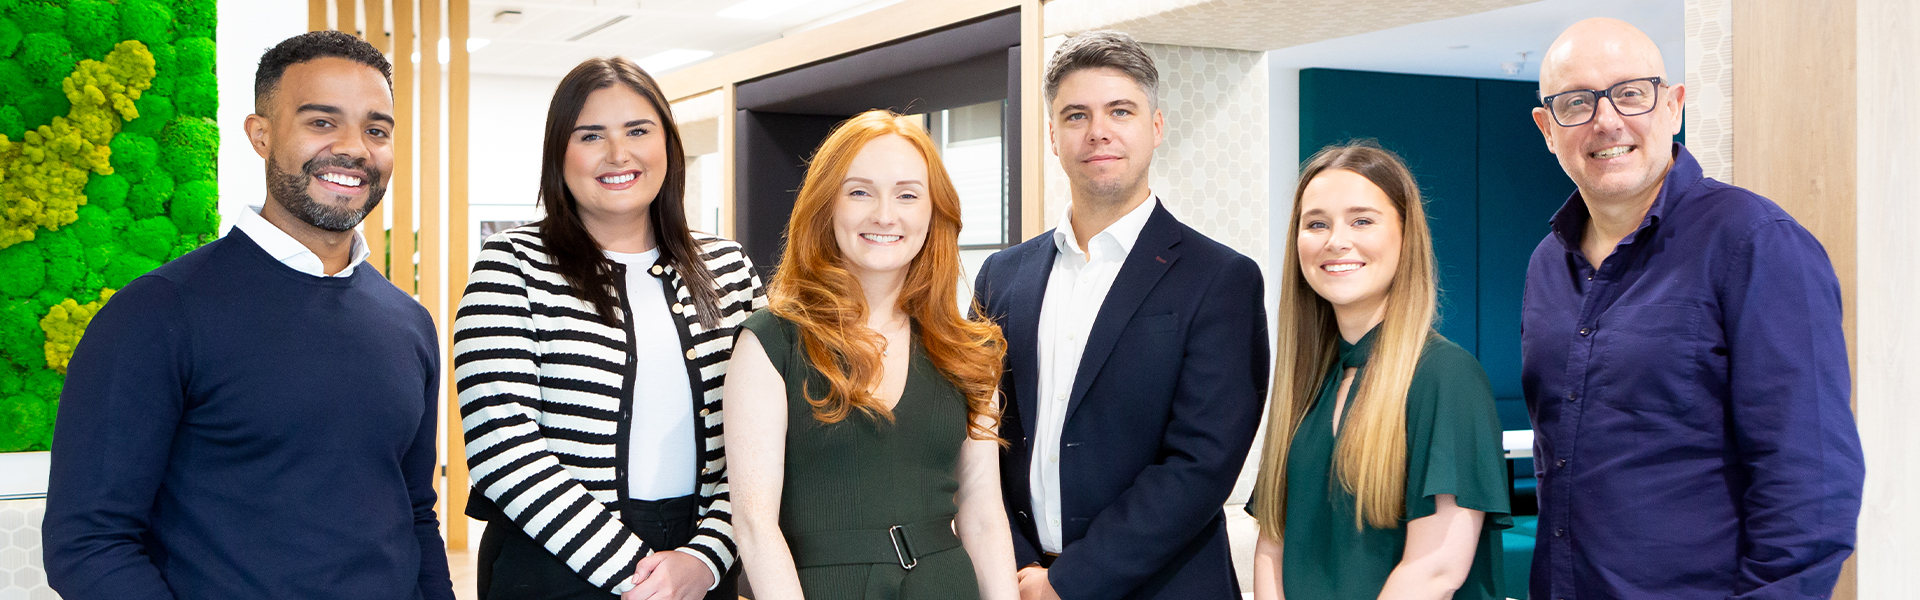 Browne Jacobson strengthens Corporate team in Manchester with new hires